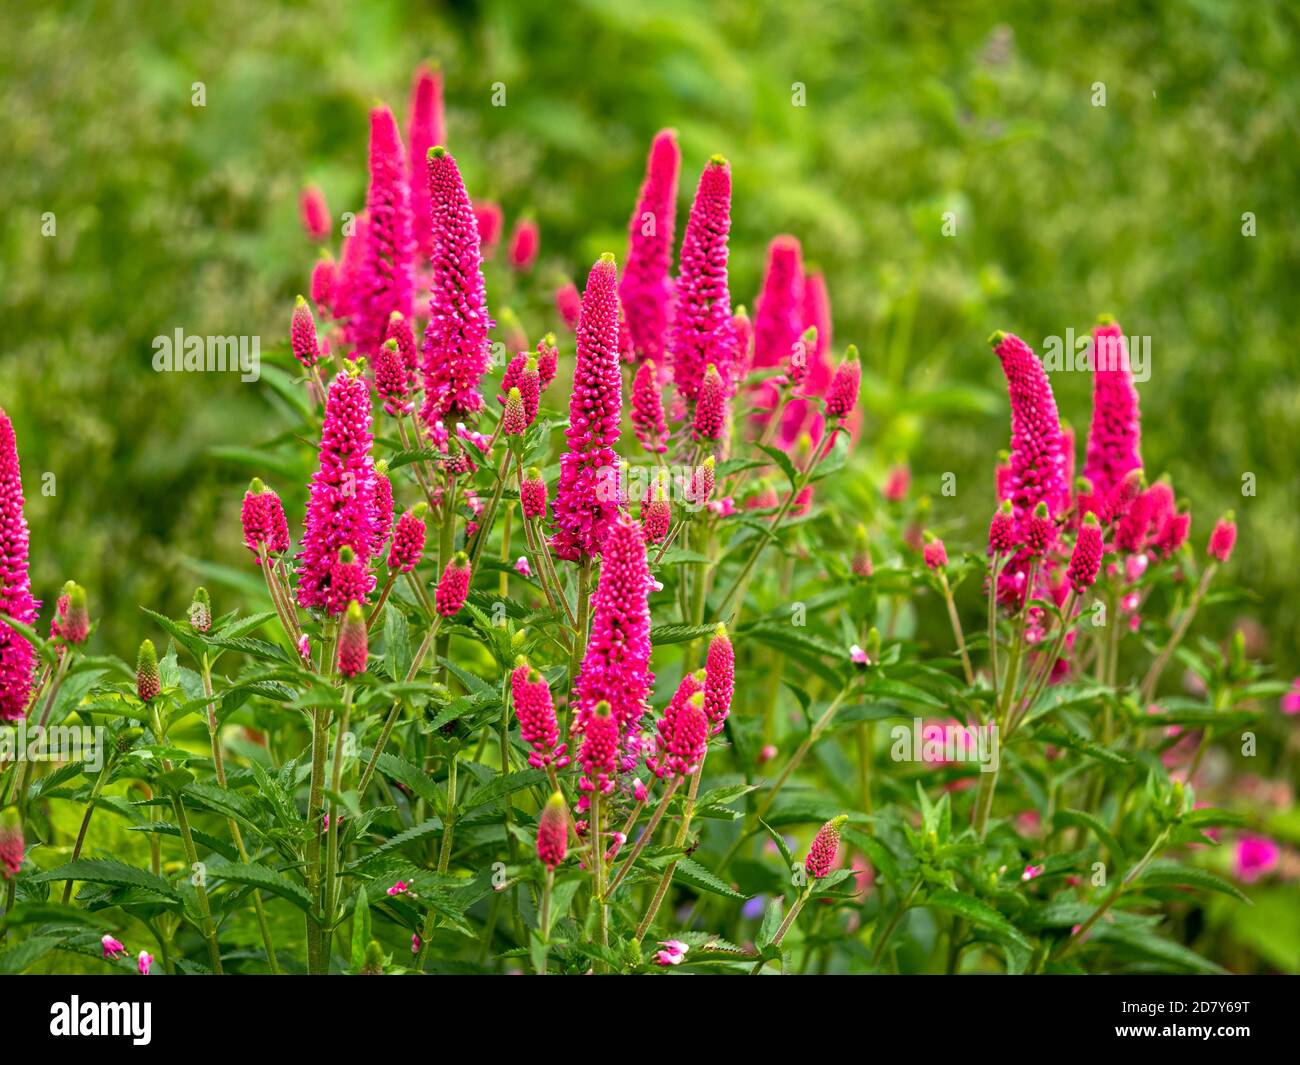 Dark pink flowers of spike speedwell, Veronica, just opening in a sunny garden Stock Photo